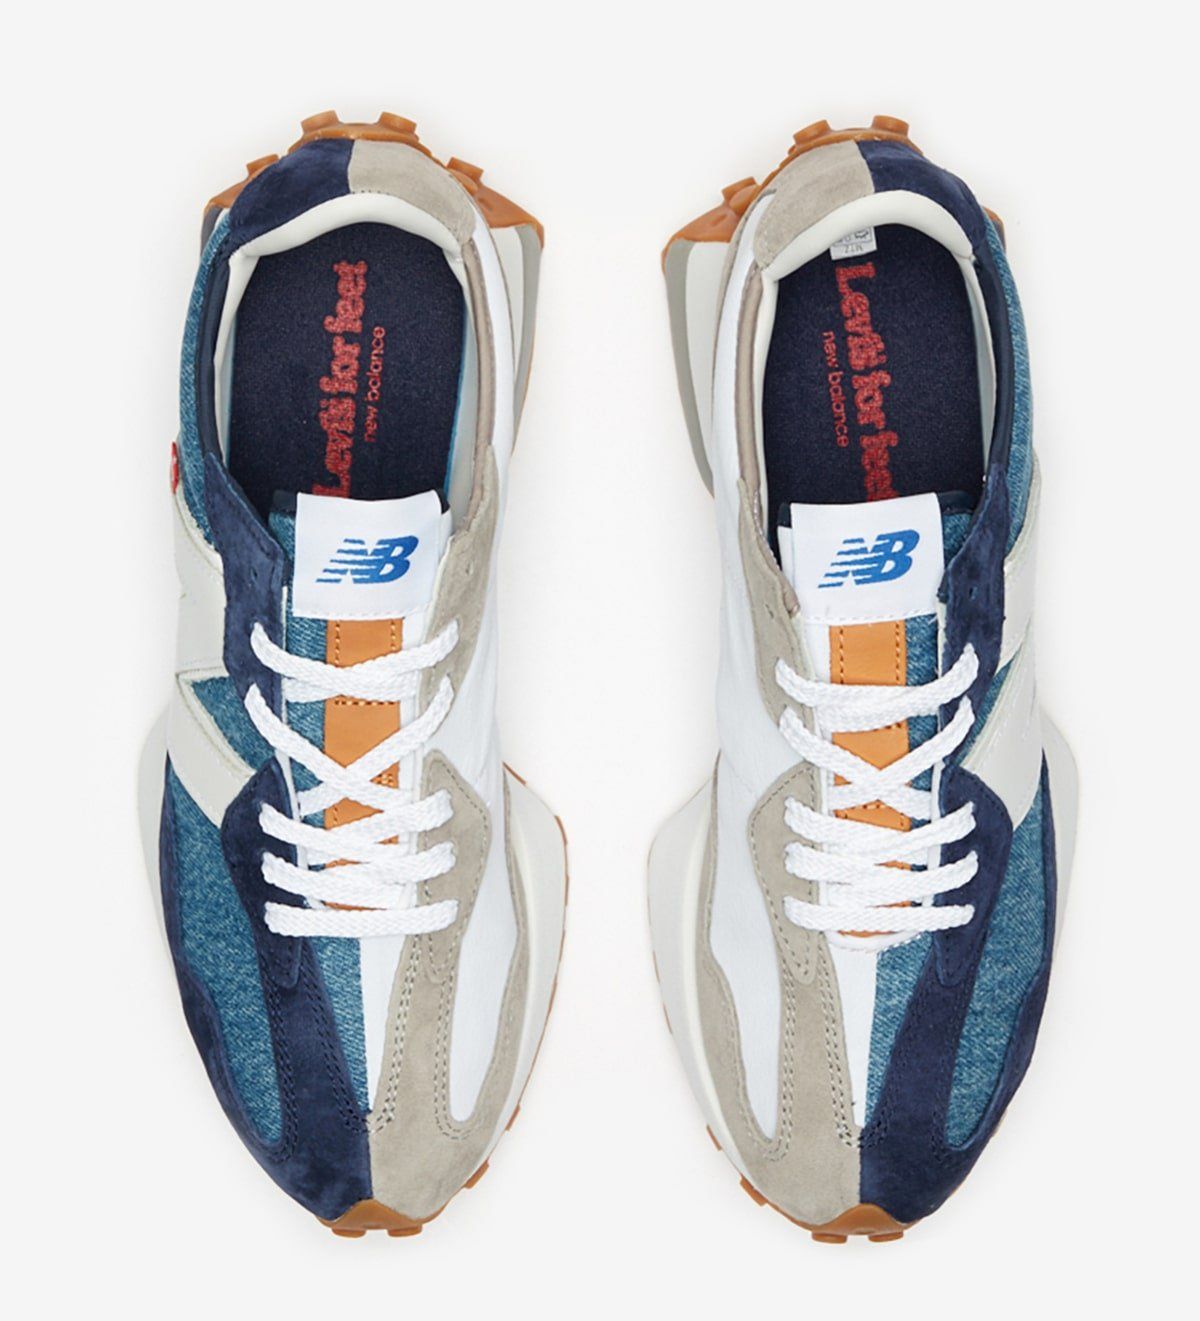 Levi's x New Balance 327 Collection Confirmed for Nov. 10th 